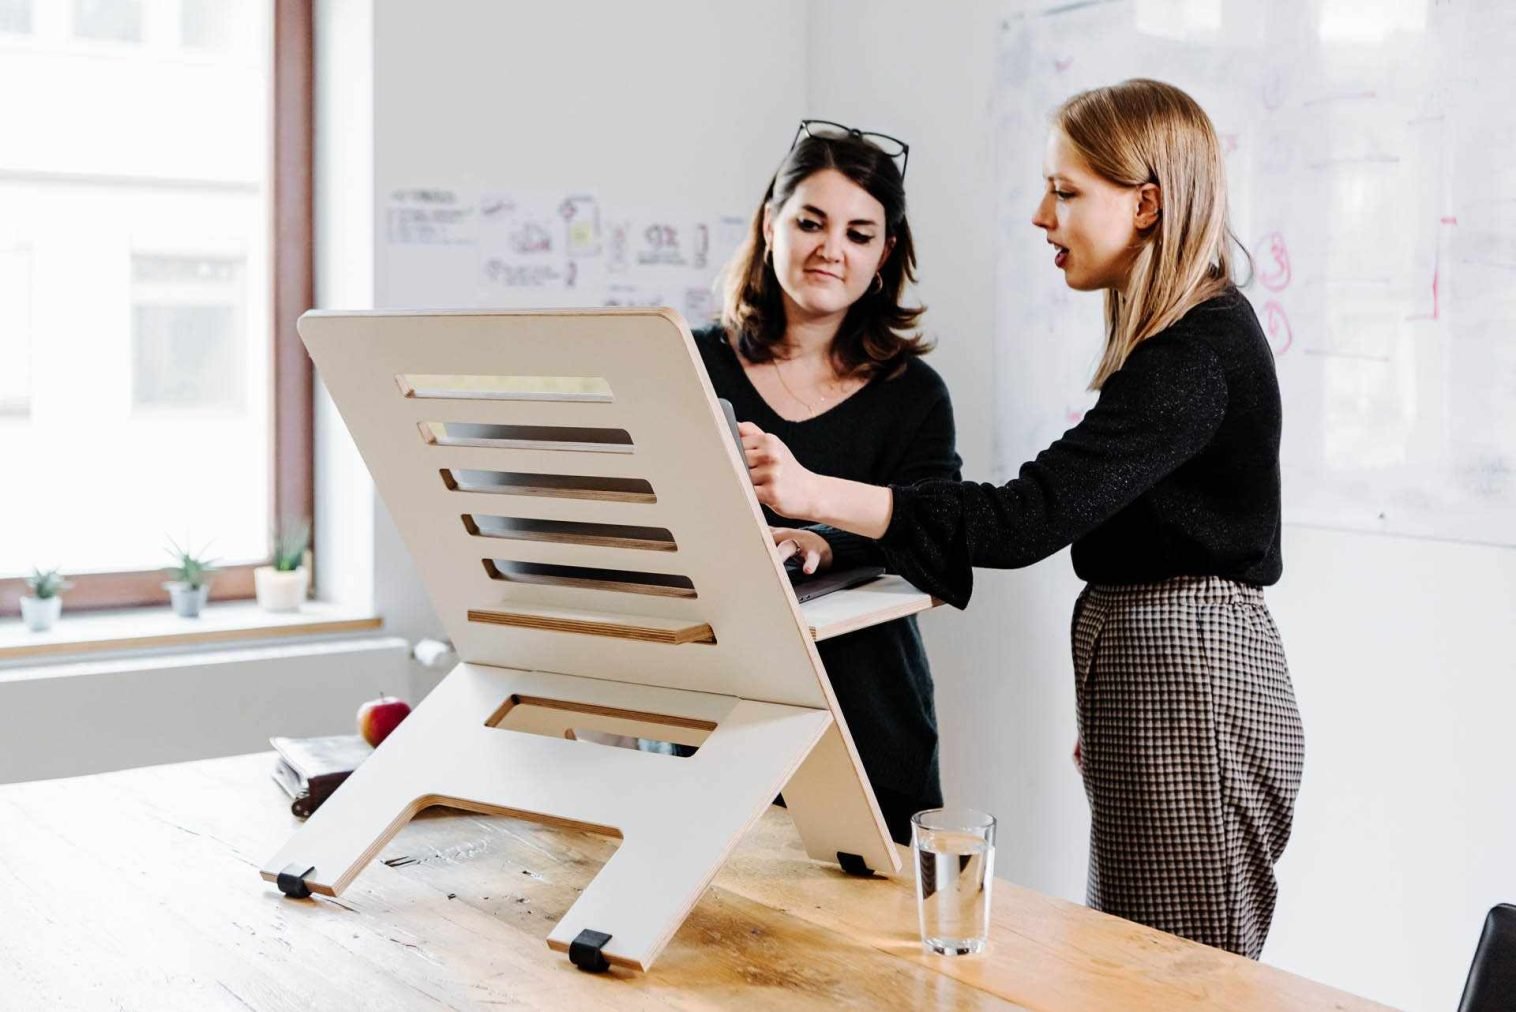 A female coach and her client at a standing desk in a creative office space, sharing ideas.